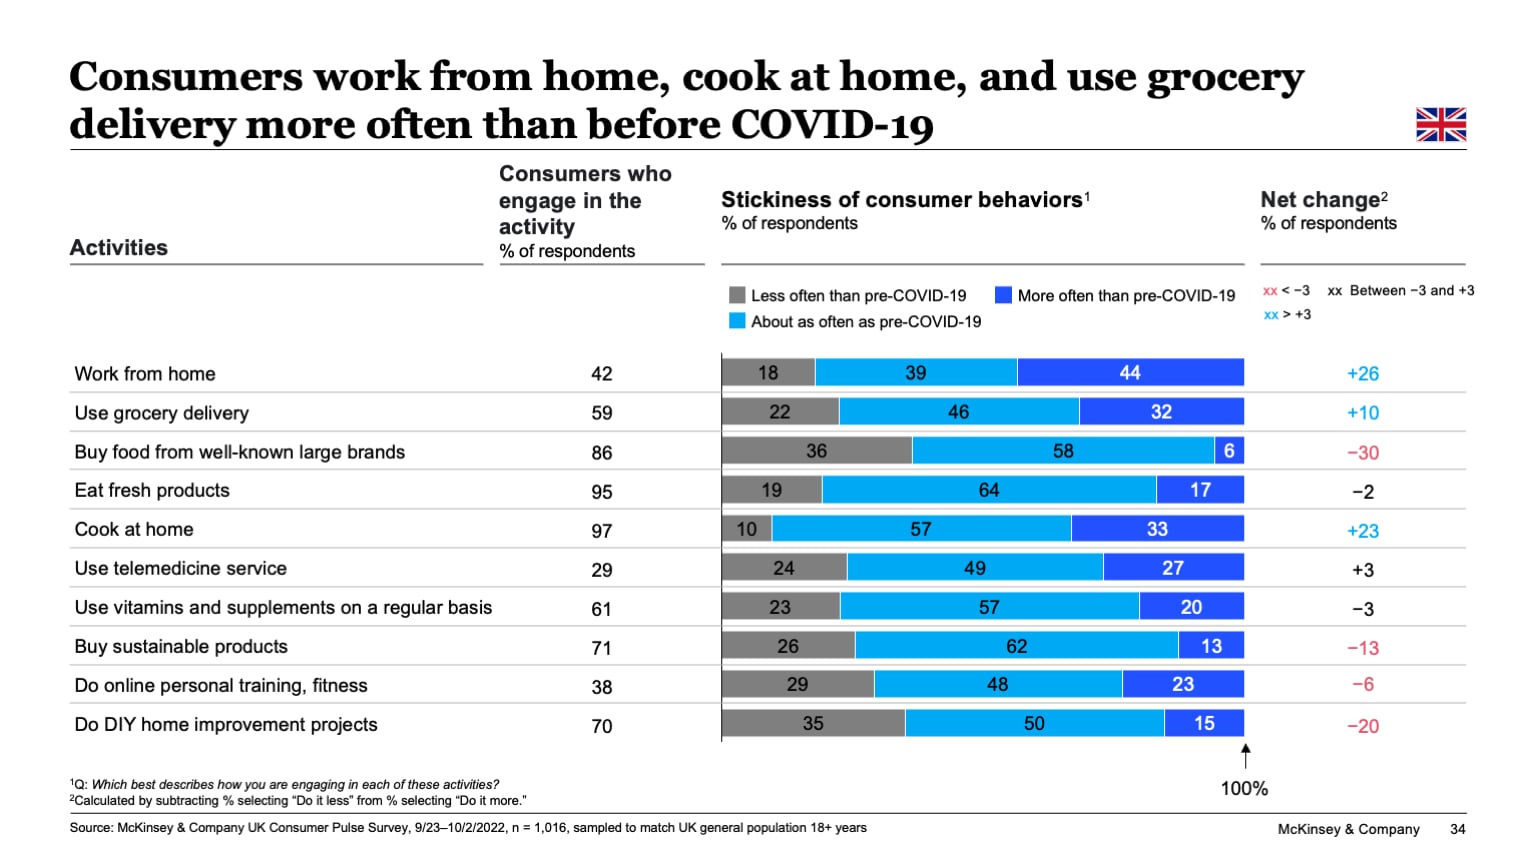 Consumers work from home, cook at home, and use grocery delivery more often than before COVID-19